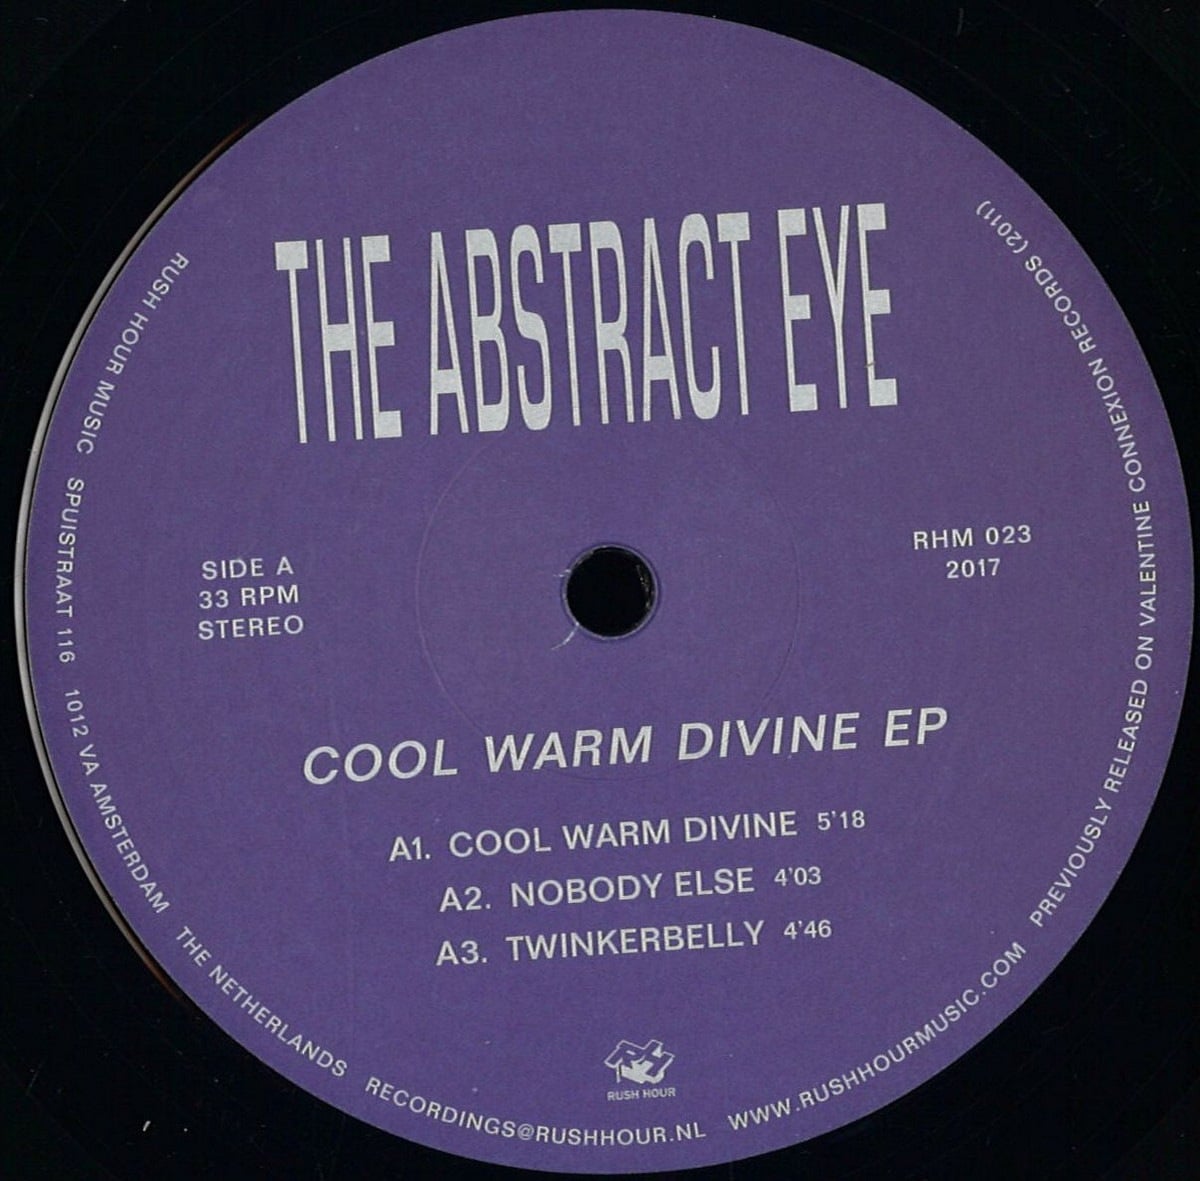 The Abstract Eye - Cool Warm Divine Ep - RHM023 - RUSH HOUR RECORDINGS